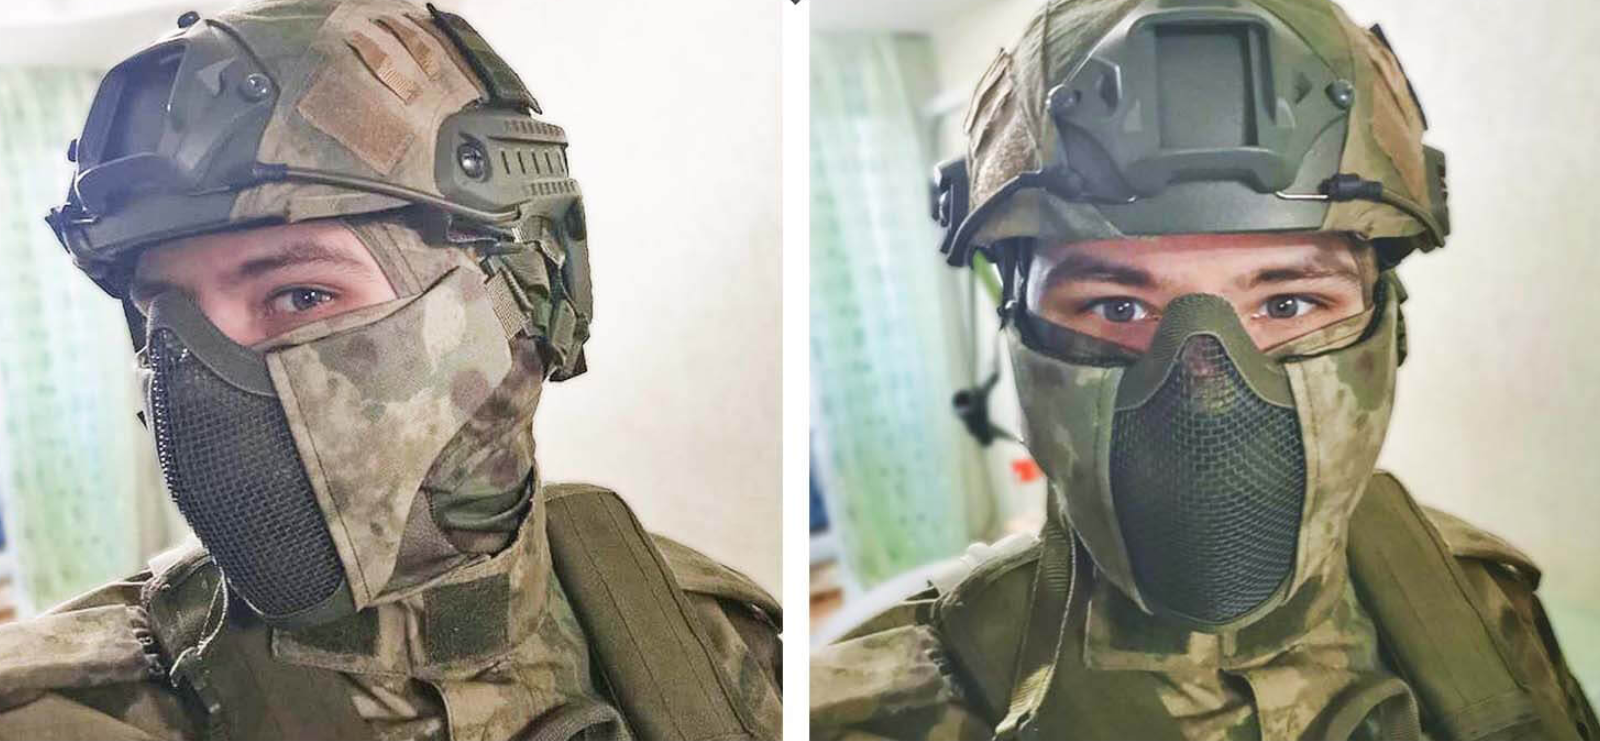 Half-Face Scream Airsoft Mesh Mask: Perfect for the Aspiring Soldier